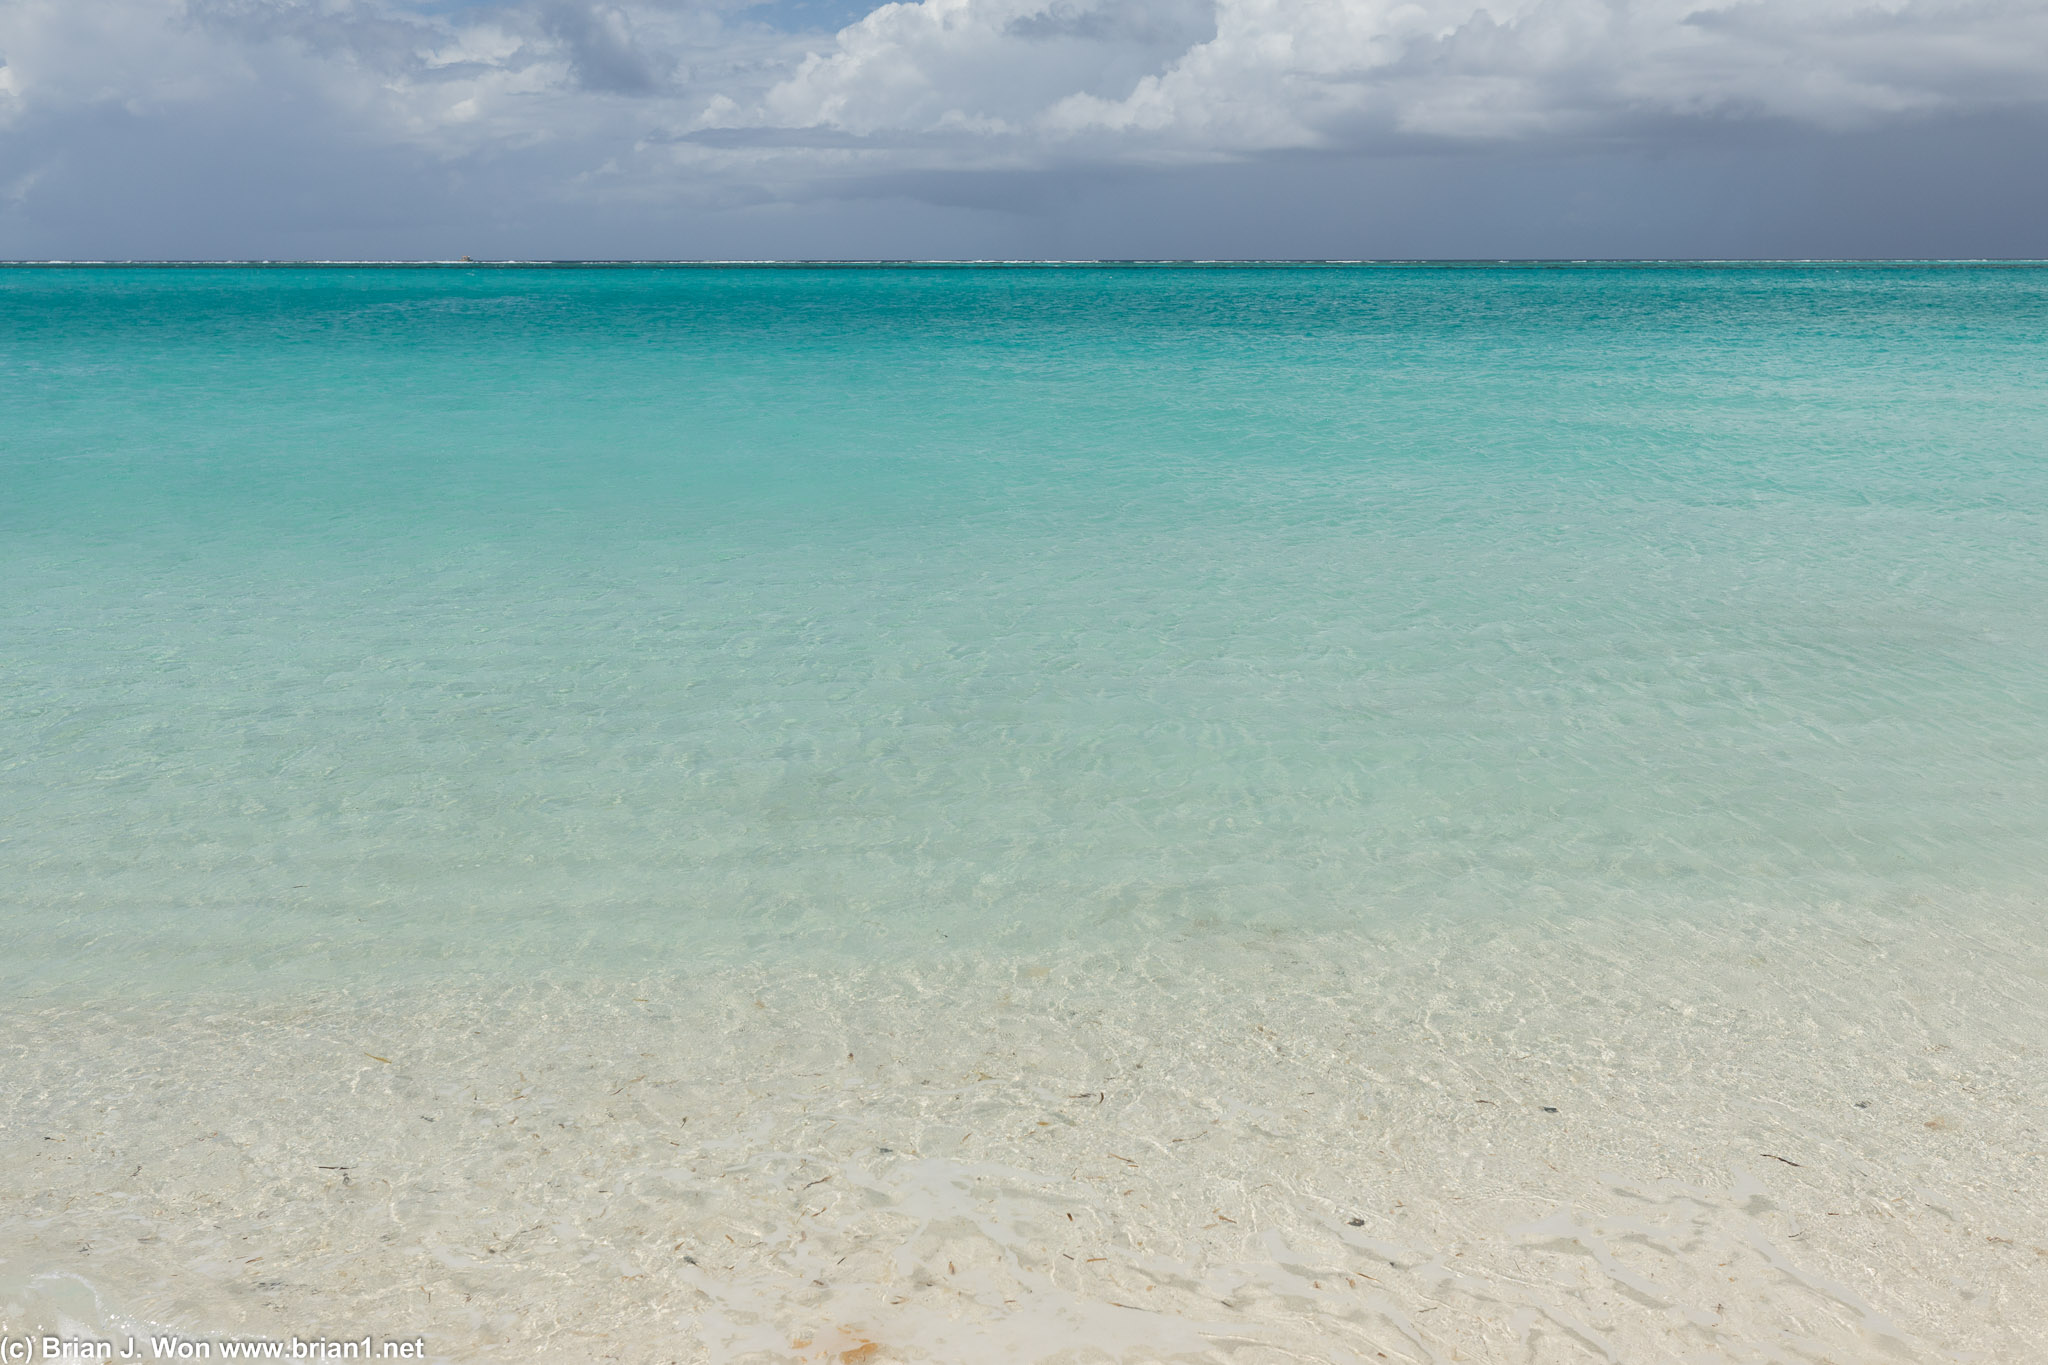 Clear turquoise water as far as the eye can see.